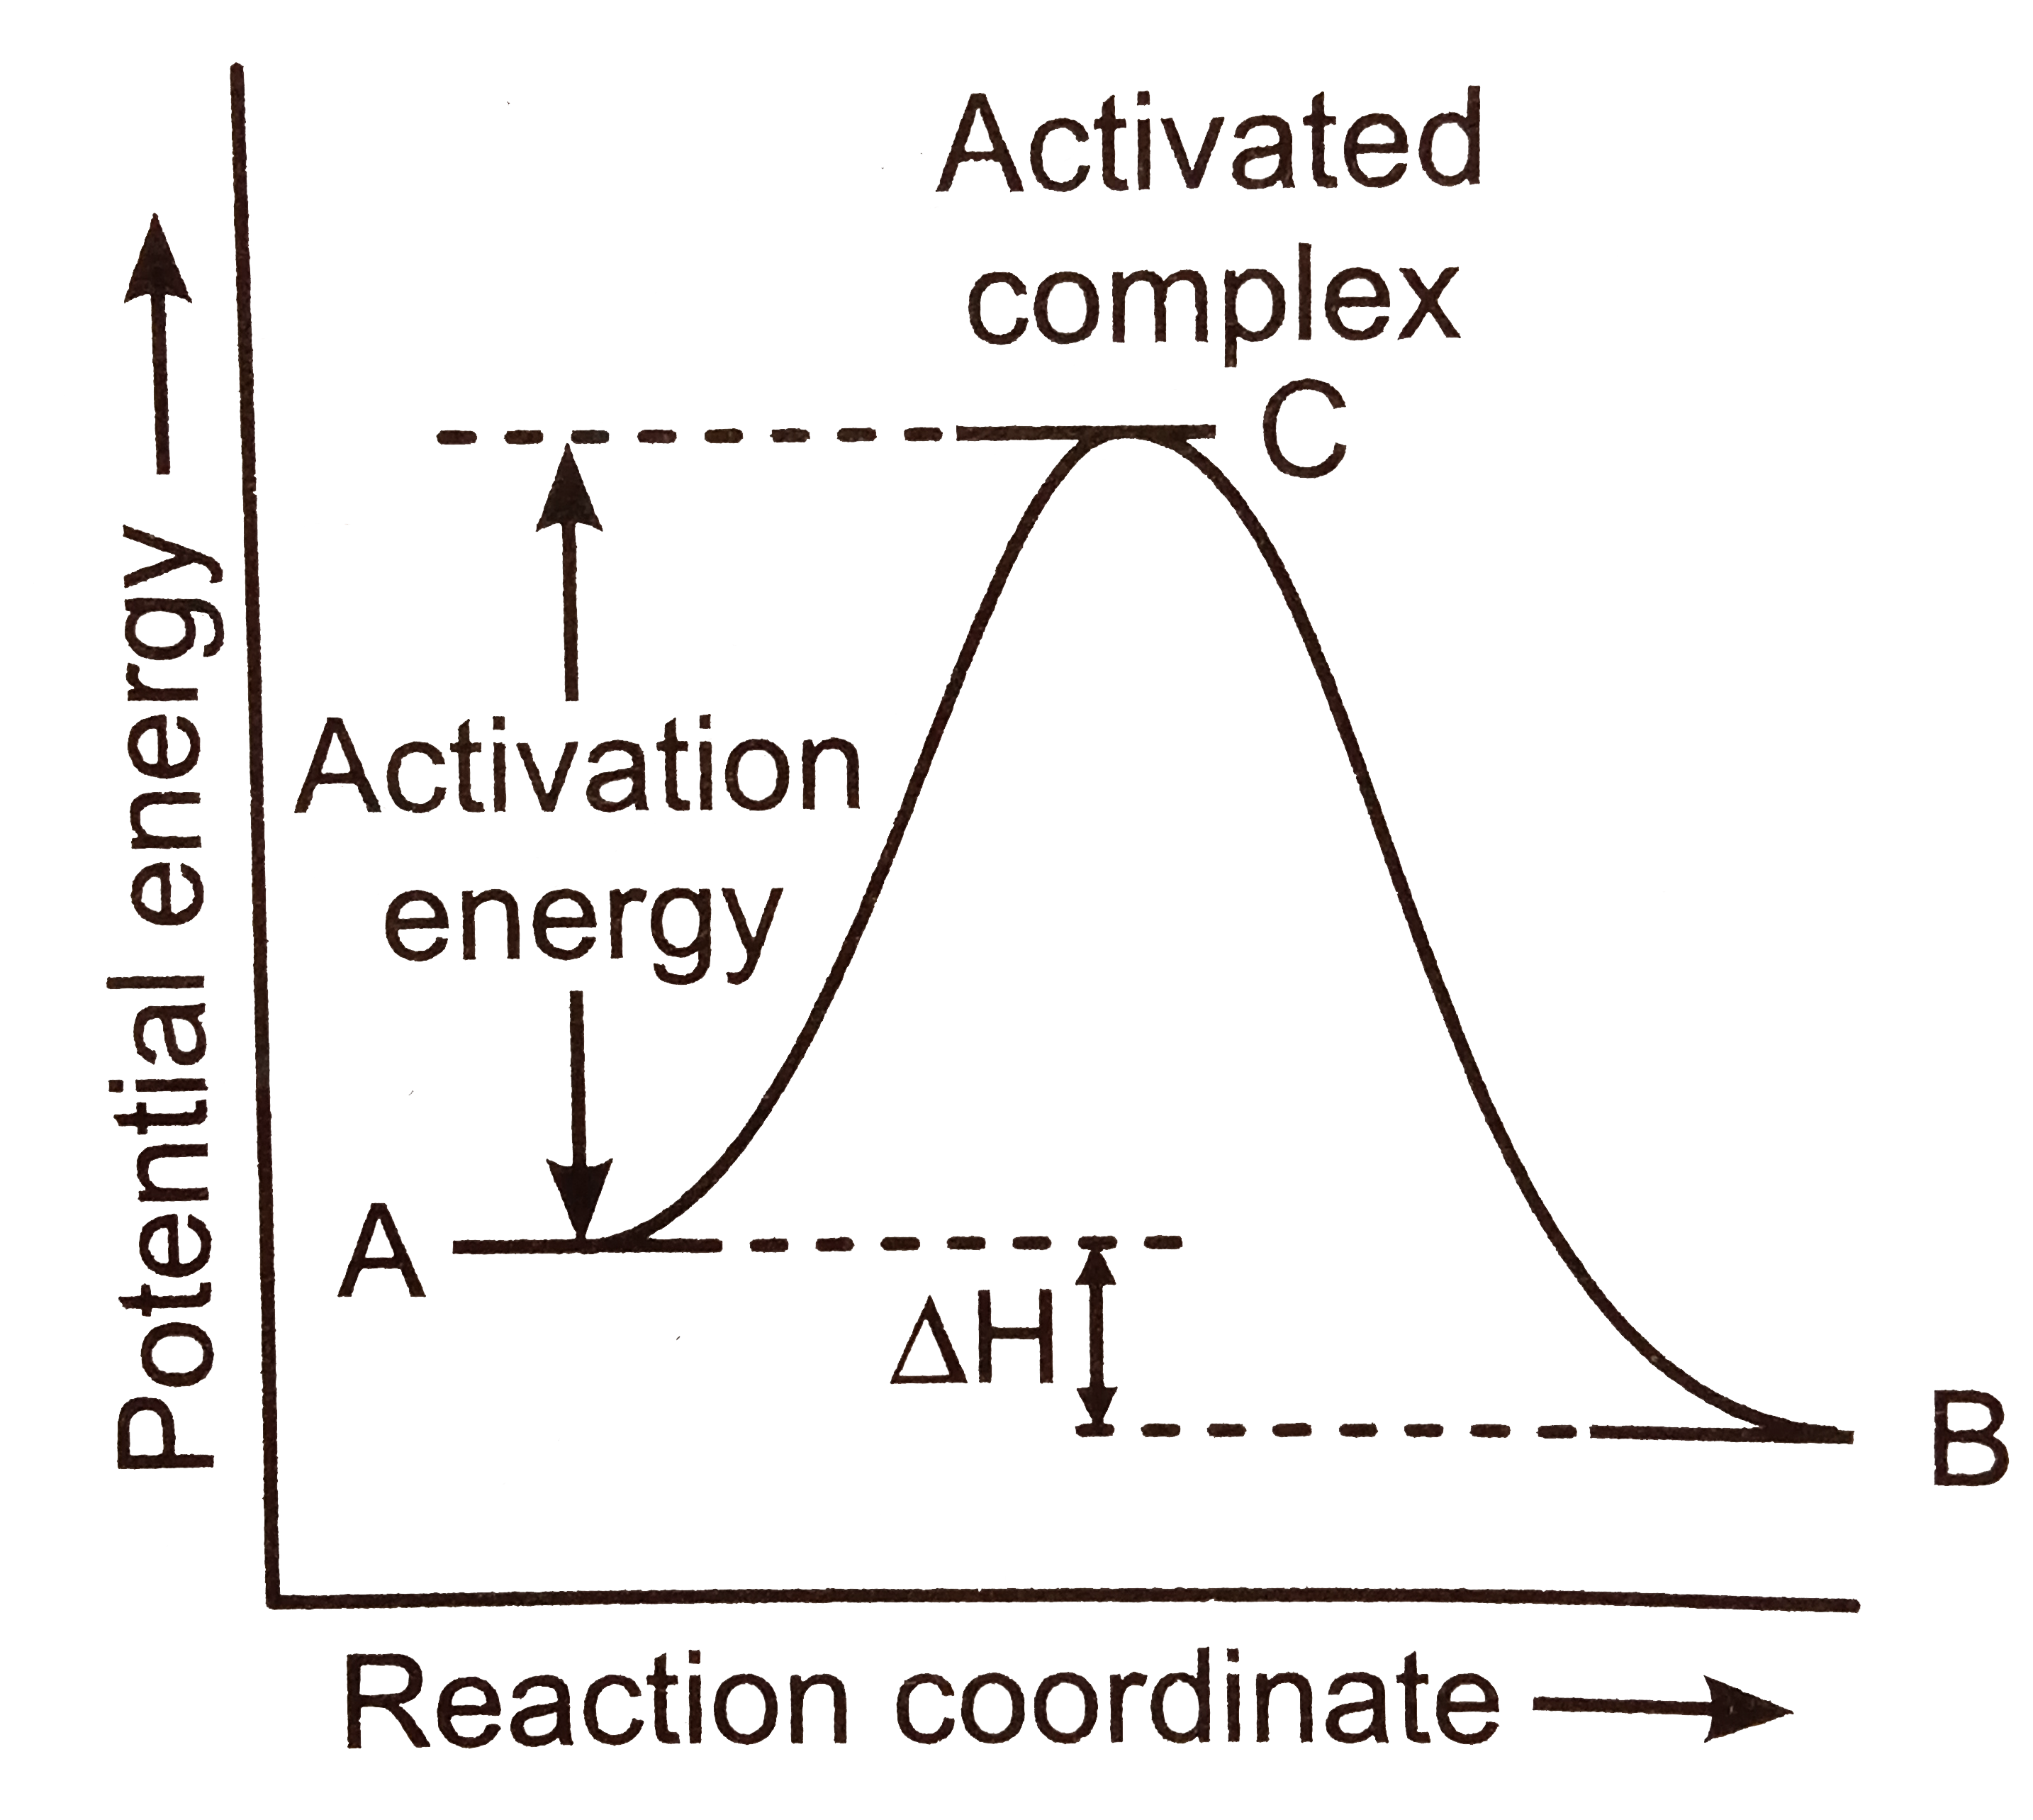 The energy required to form the intermediate, called activated complex (C ) is known as activation energy (E(a)). The diagram is obtained by plotting potential energy vs. reaction coordinate. Reaction coordinate represents the profile of energy change when reactants change into products.   Some energy is released when the complex decomposes to form products. So, the heat of the reaction depends upon the nature of reactants and products.      If a reaction A+Brarr C, is exothermic to the extent of 30 kJ mol^(-1) and the forward reaction has an activation energy of 249 kJ mol^(-1), the activation energy for reverse reaction in kJ mol^(-1) is: